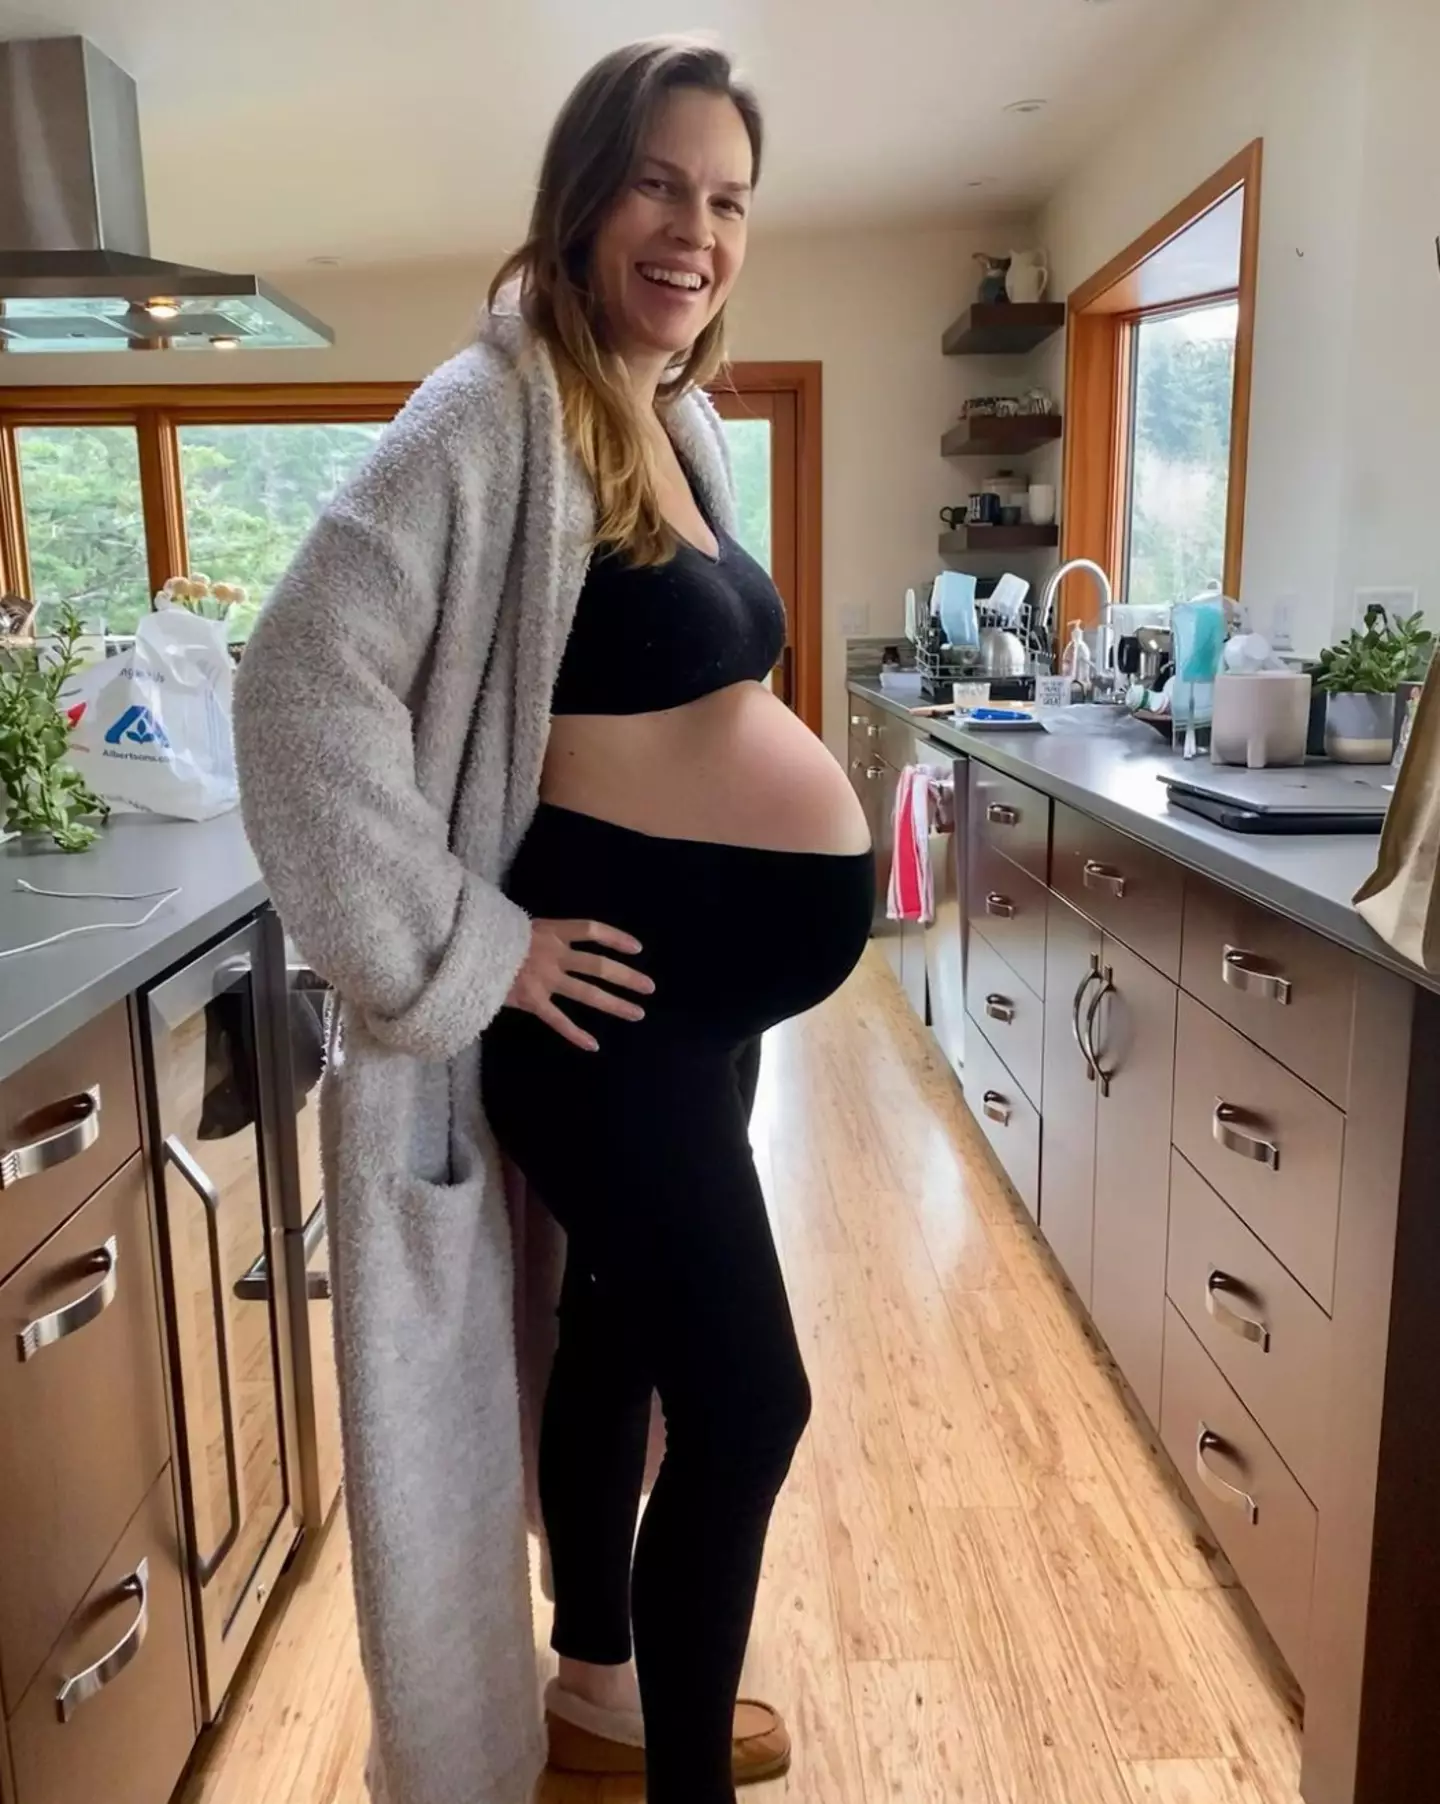 The actor has shared snaps of her growing baby bump on Instagram.